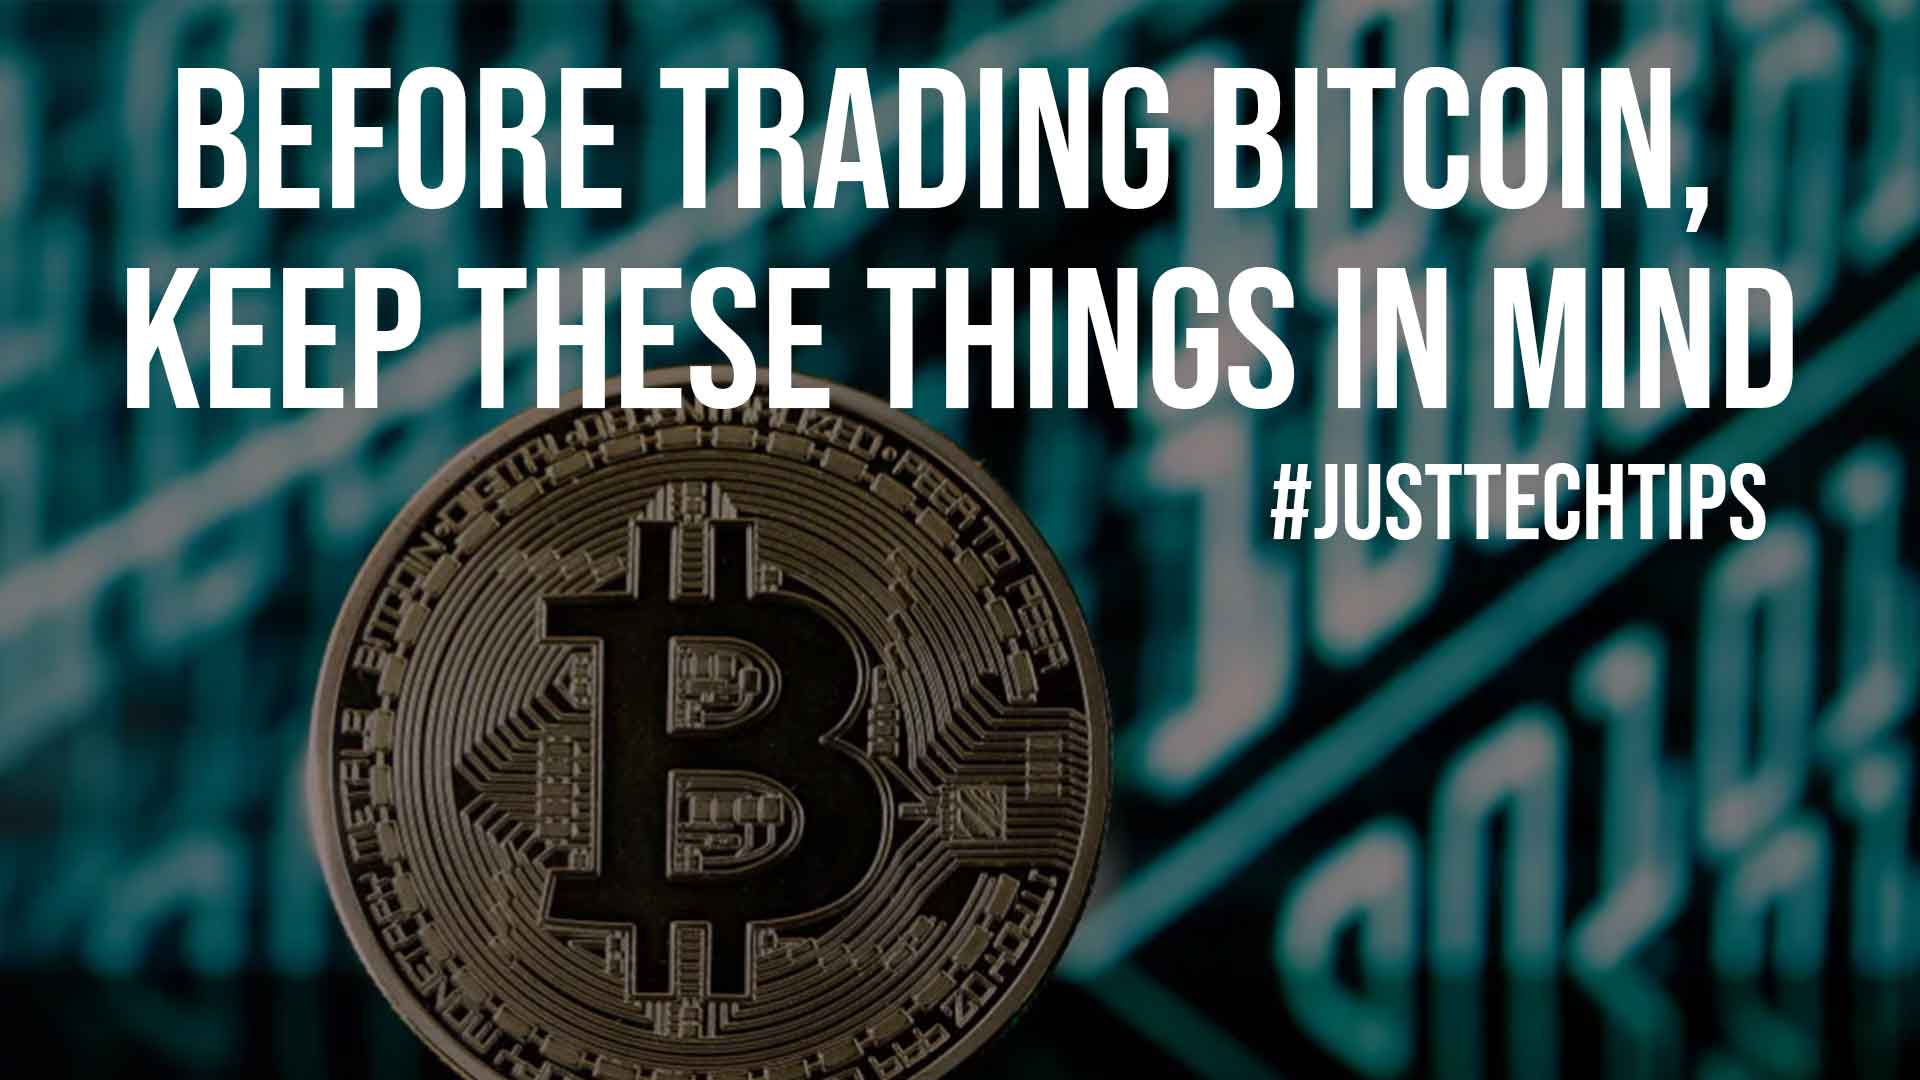 Before Trading Bitcoin Keep These Things in Mind